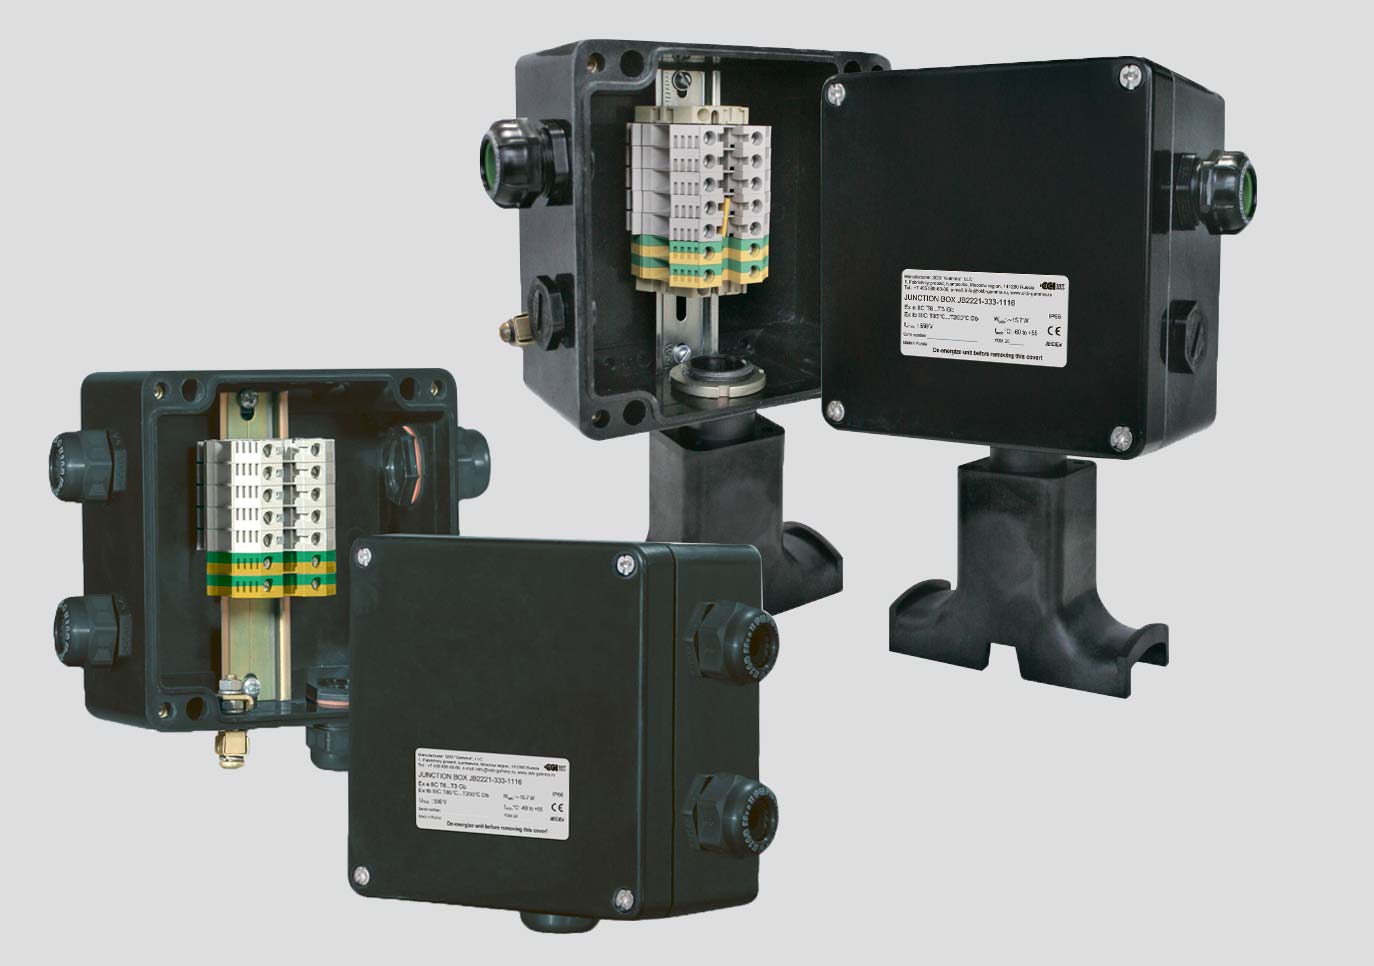 Junction Boxes for Self-Regulating Heating Cables (3 and More Circuits)